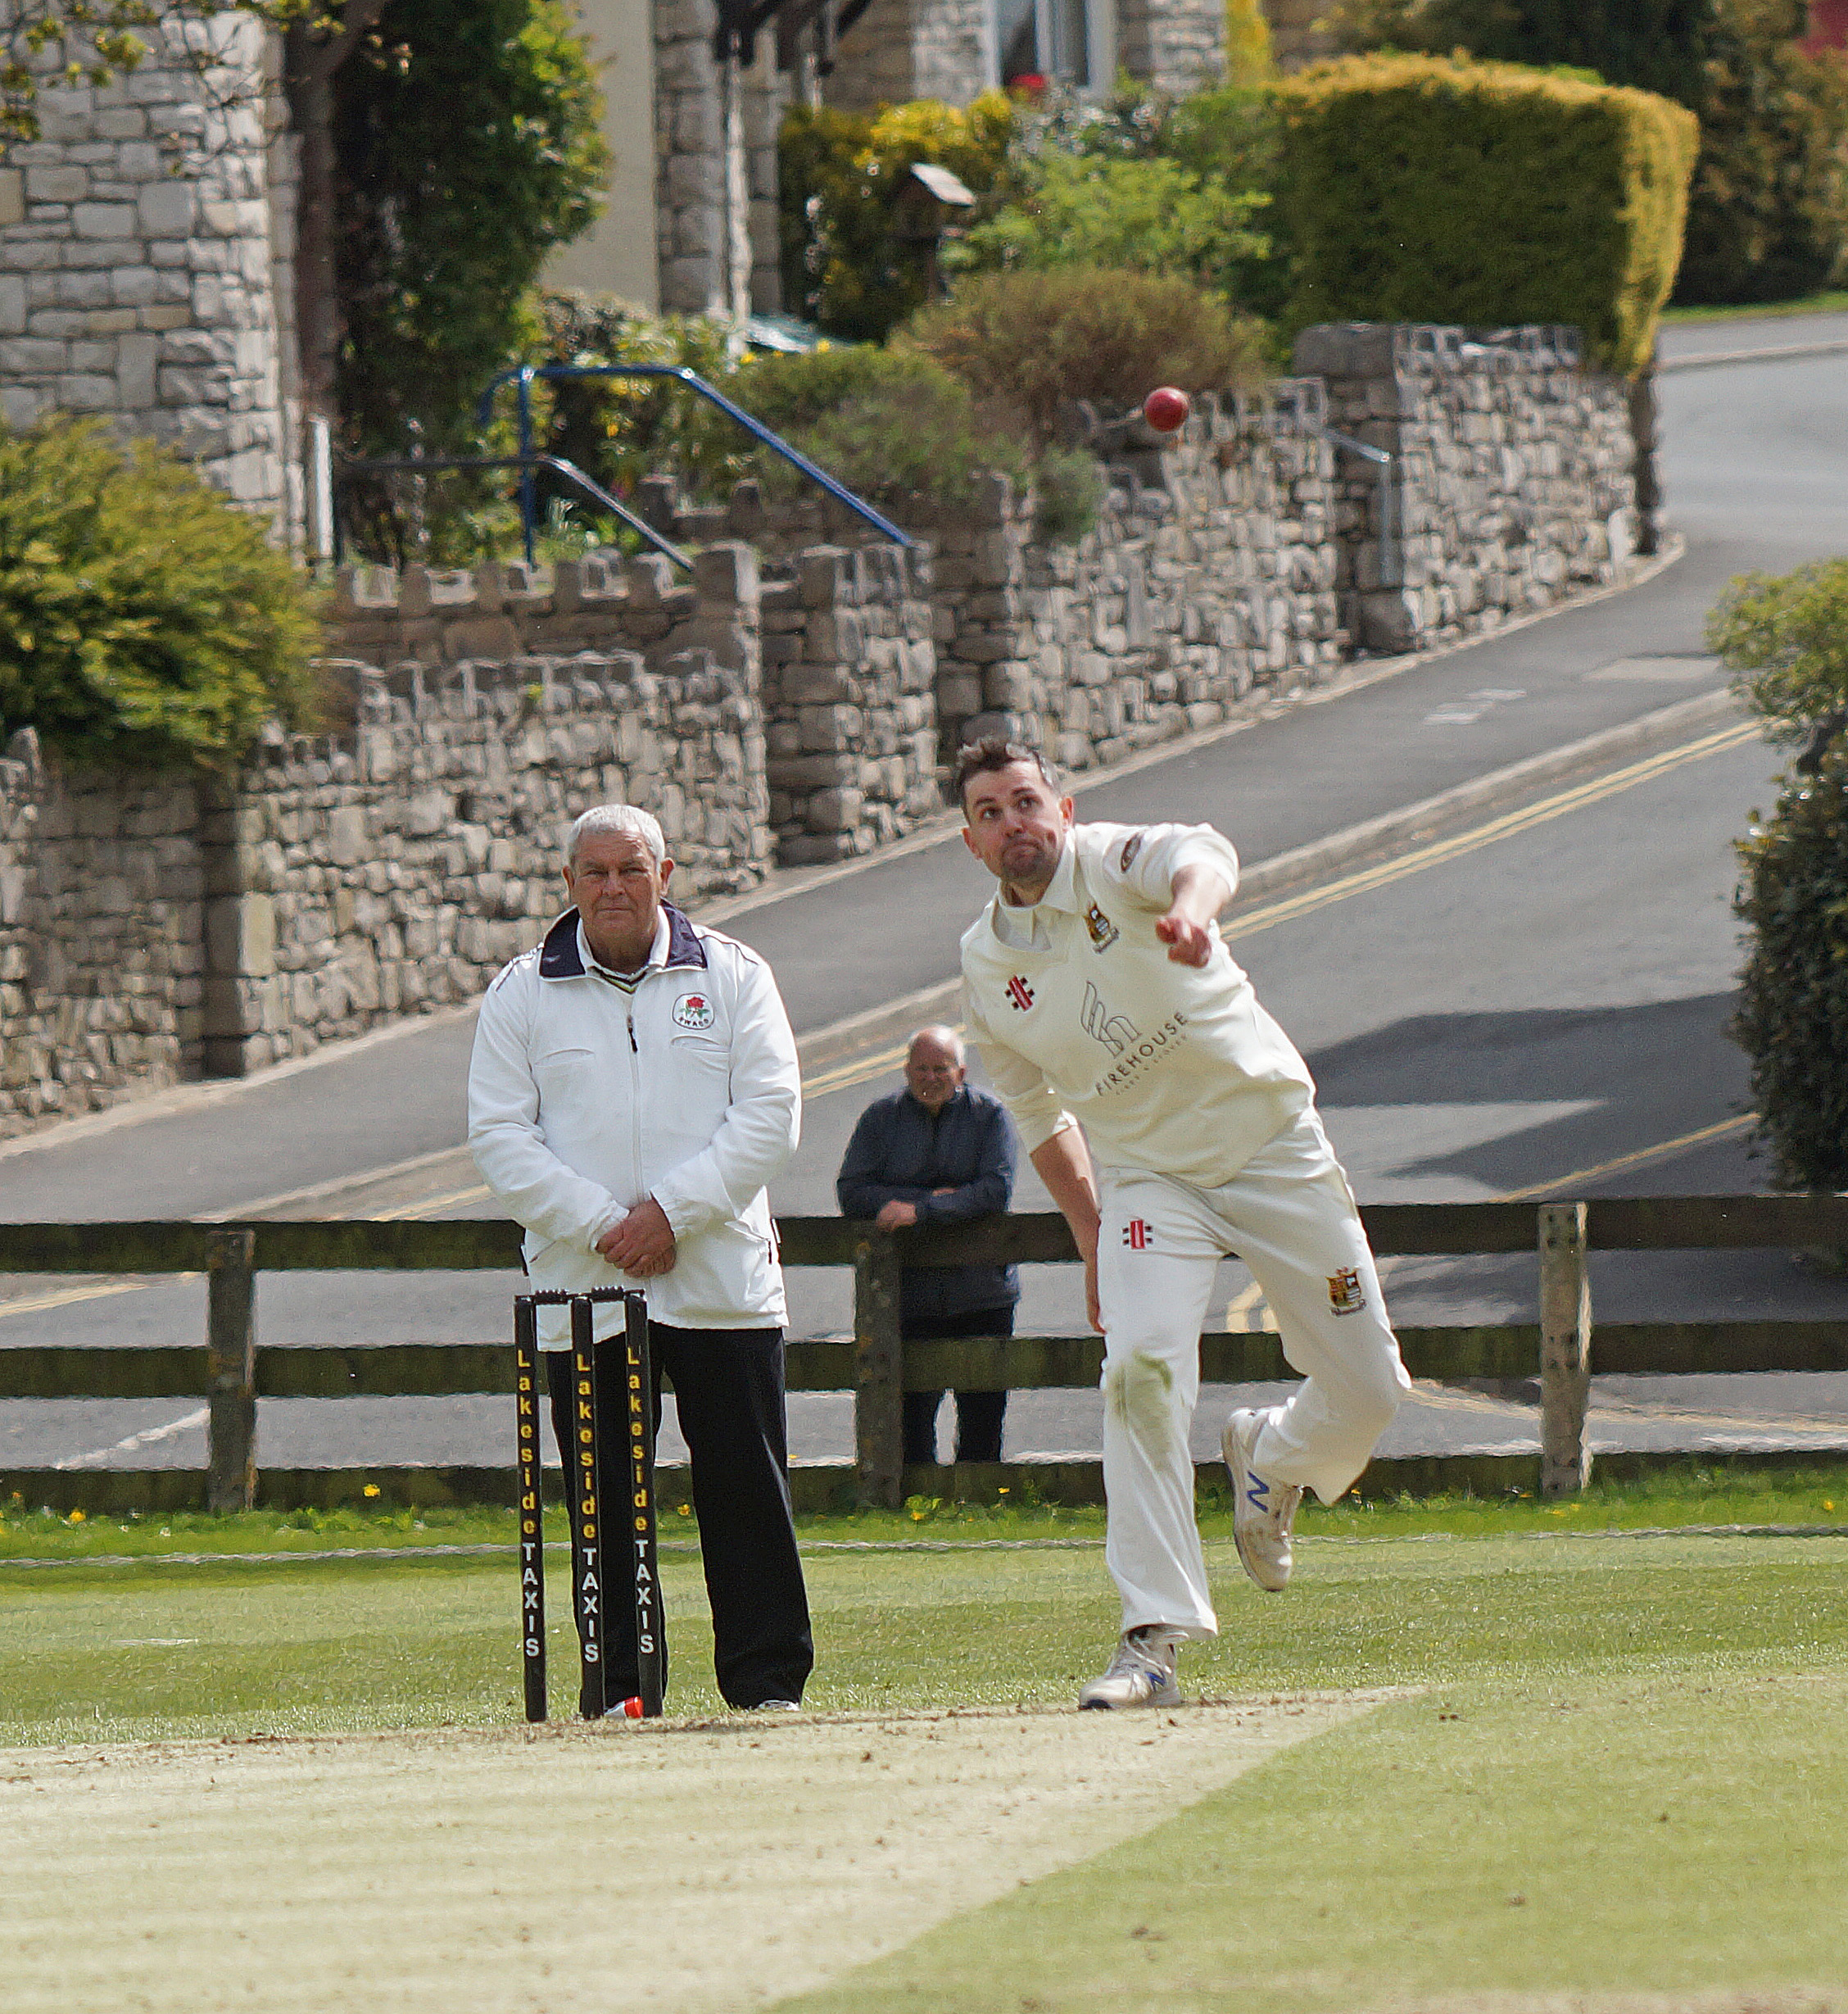 CRICKET: Kendal and Netherfield who saw their games called off due to the weather (Report and Photographs by Richard Edmondson)